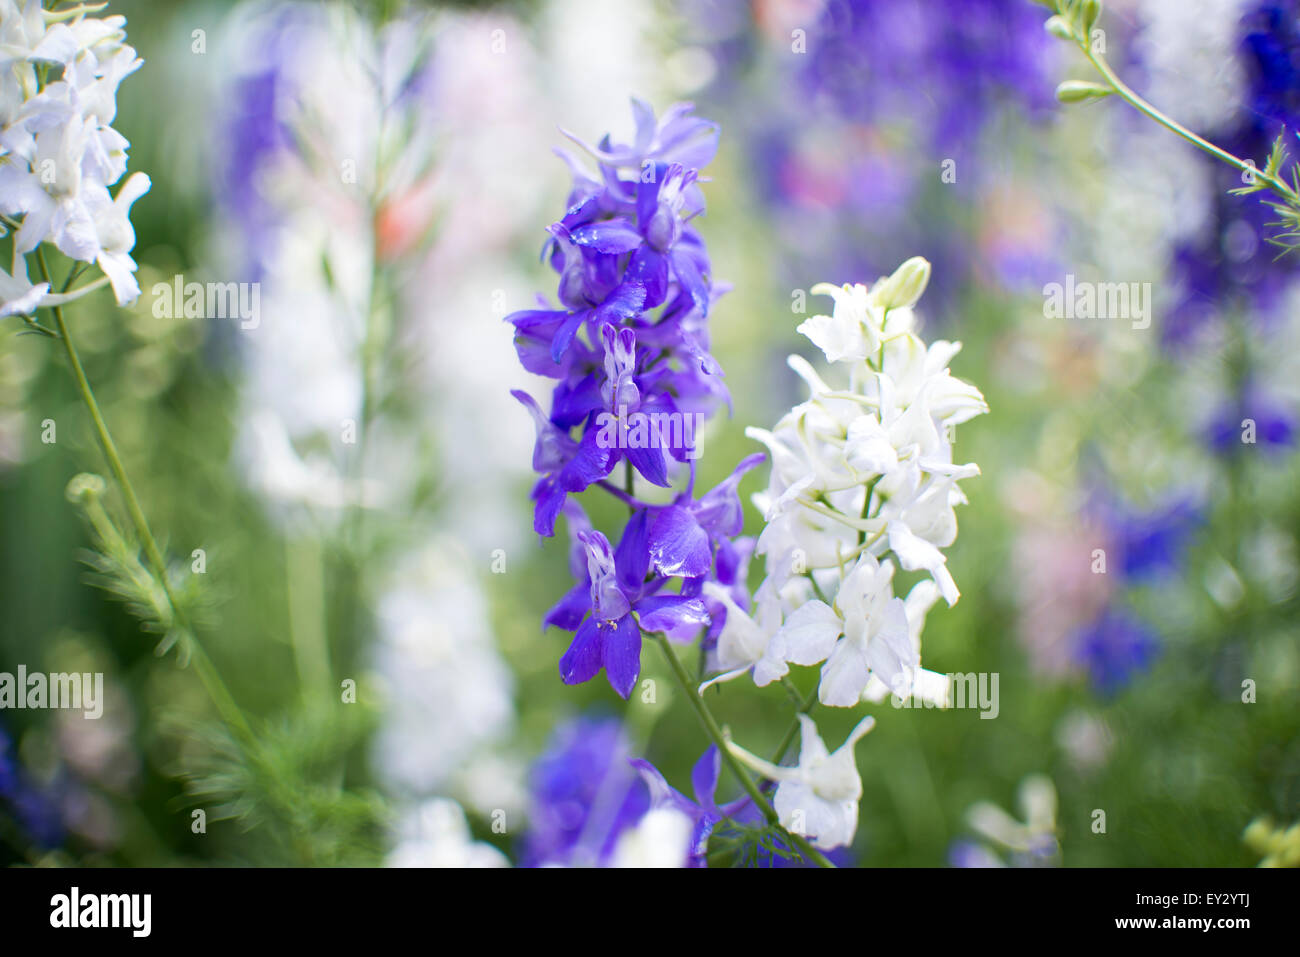 Detail of purple and white flowers with shallow DOF Stock Photo